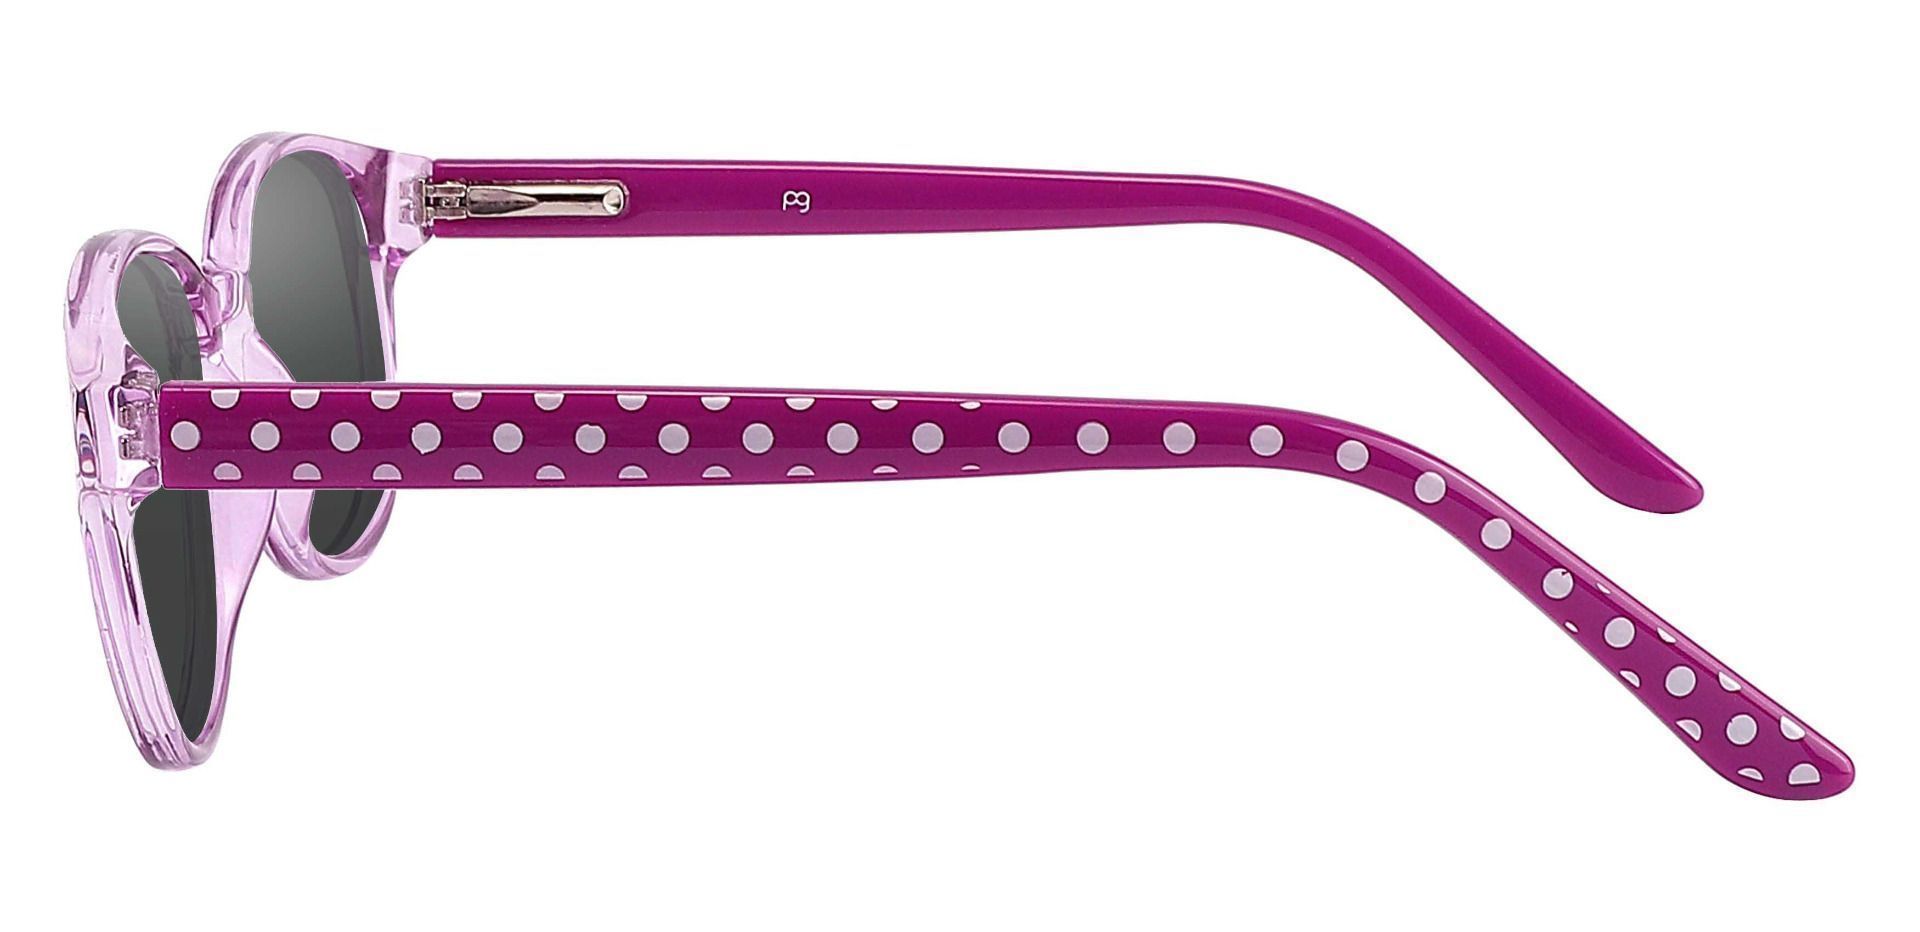 Libby Oval Non-Rx Sunglasses - Purple Frame With Gray Lenses